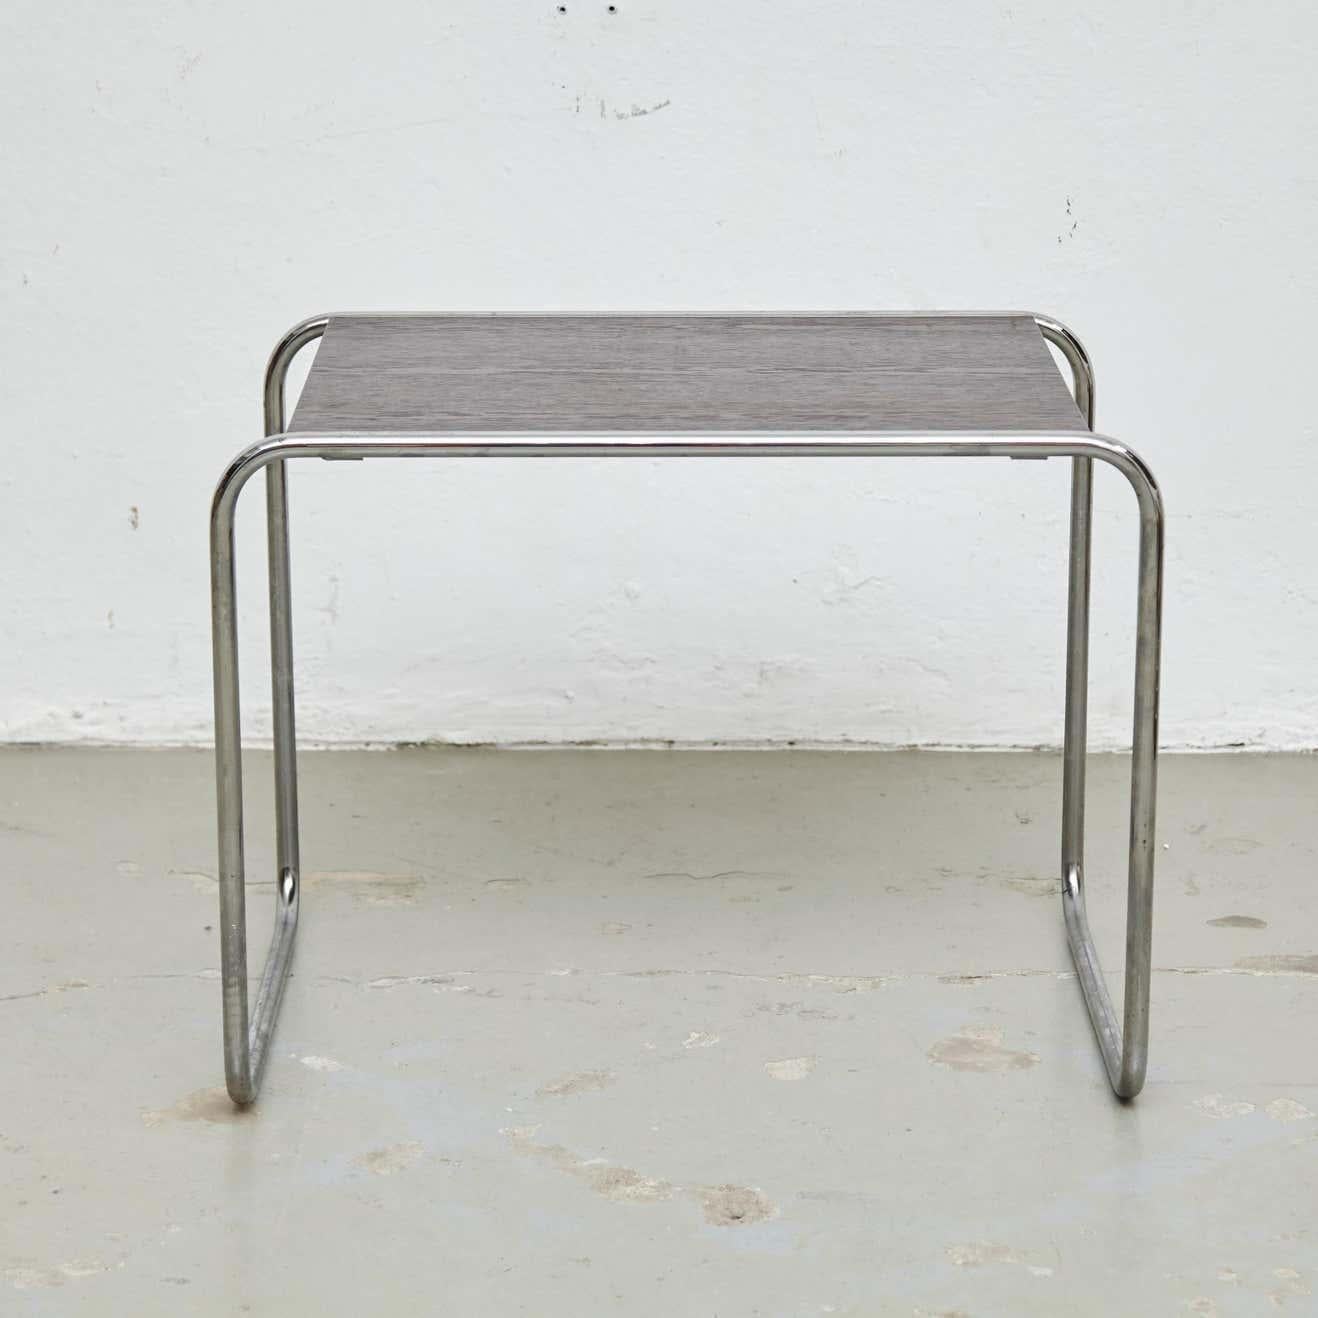 Table designed by Marcel Breuer in early 20th century.
Manufactured by Gavina, Italy, circa 1960.

In original condition, with minor wear consistent with age and use, preserving a beautiful patina.

Materials:
Wood
Steel

Dimensions:
D 45